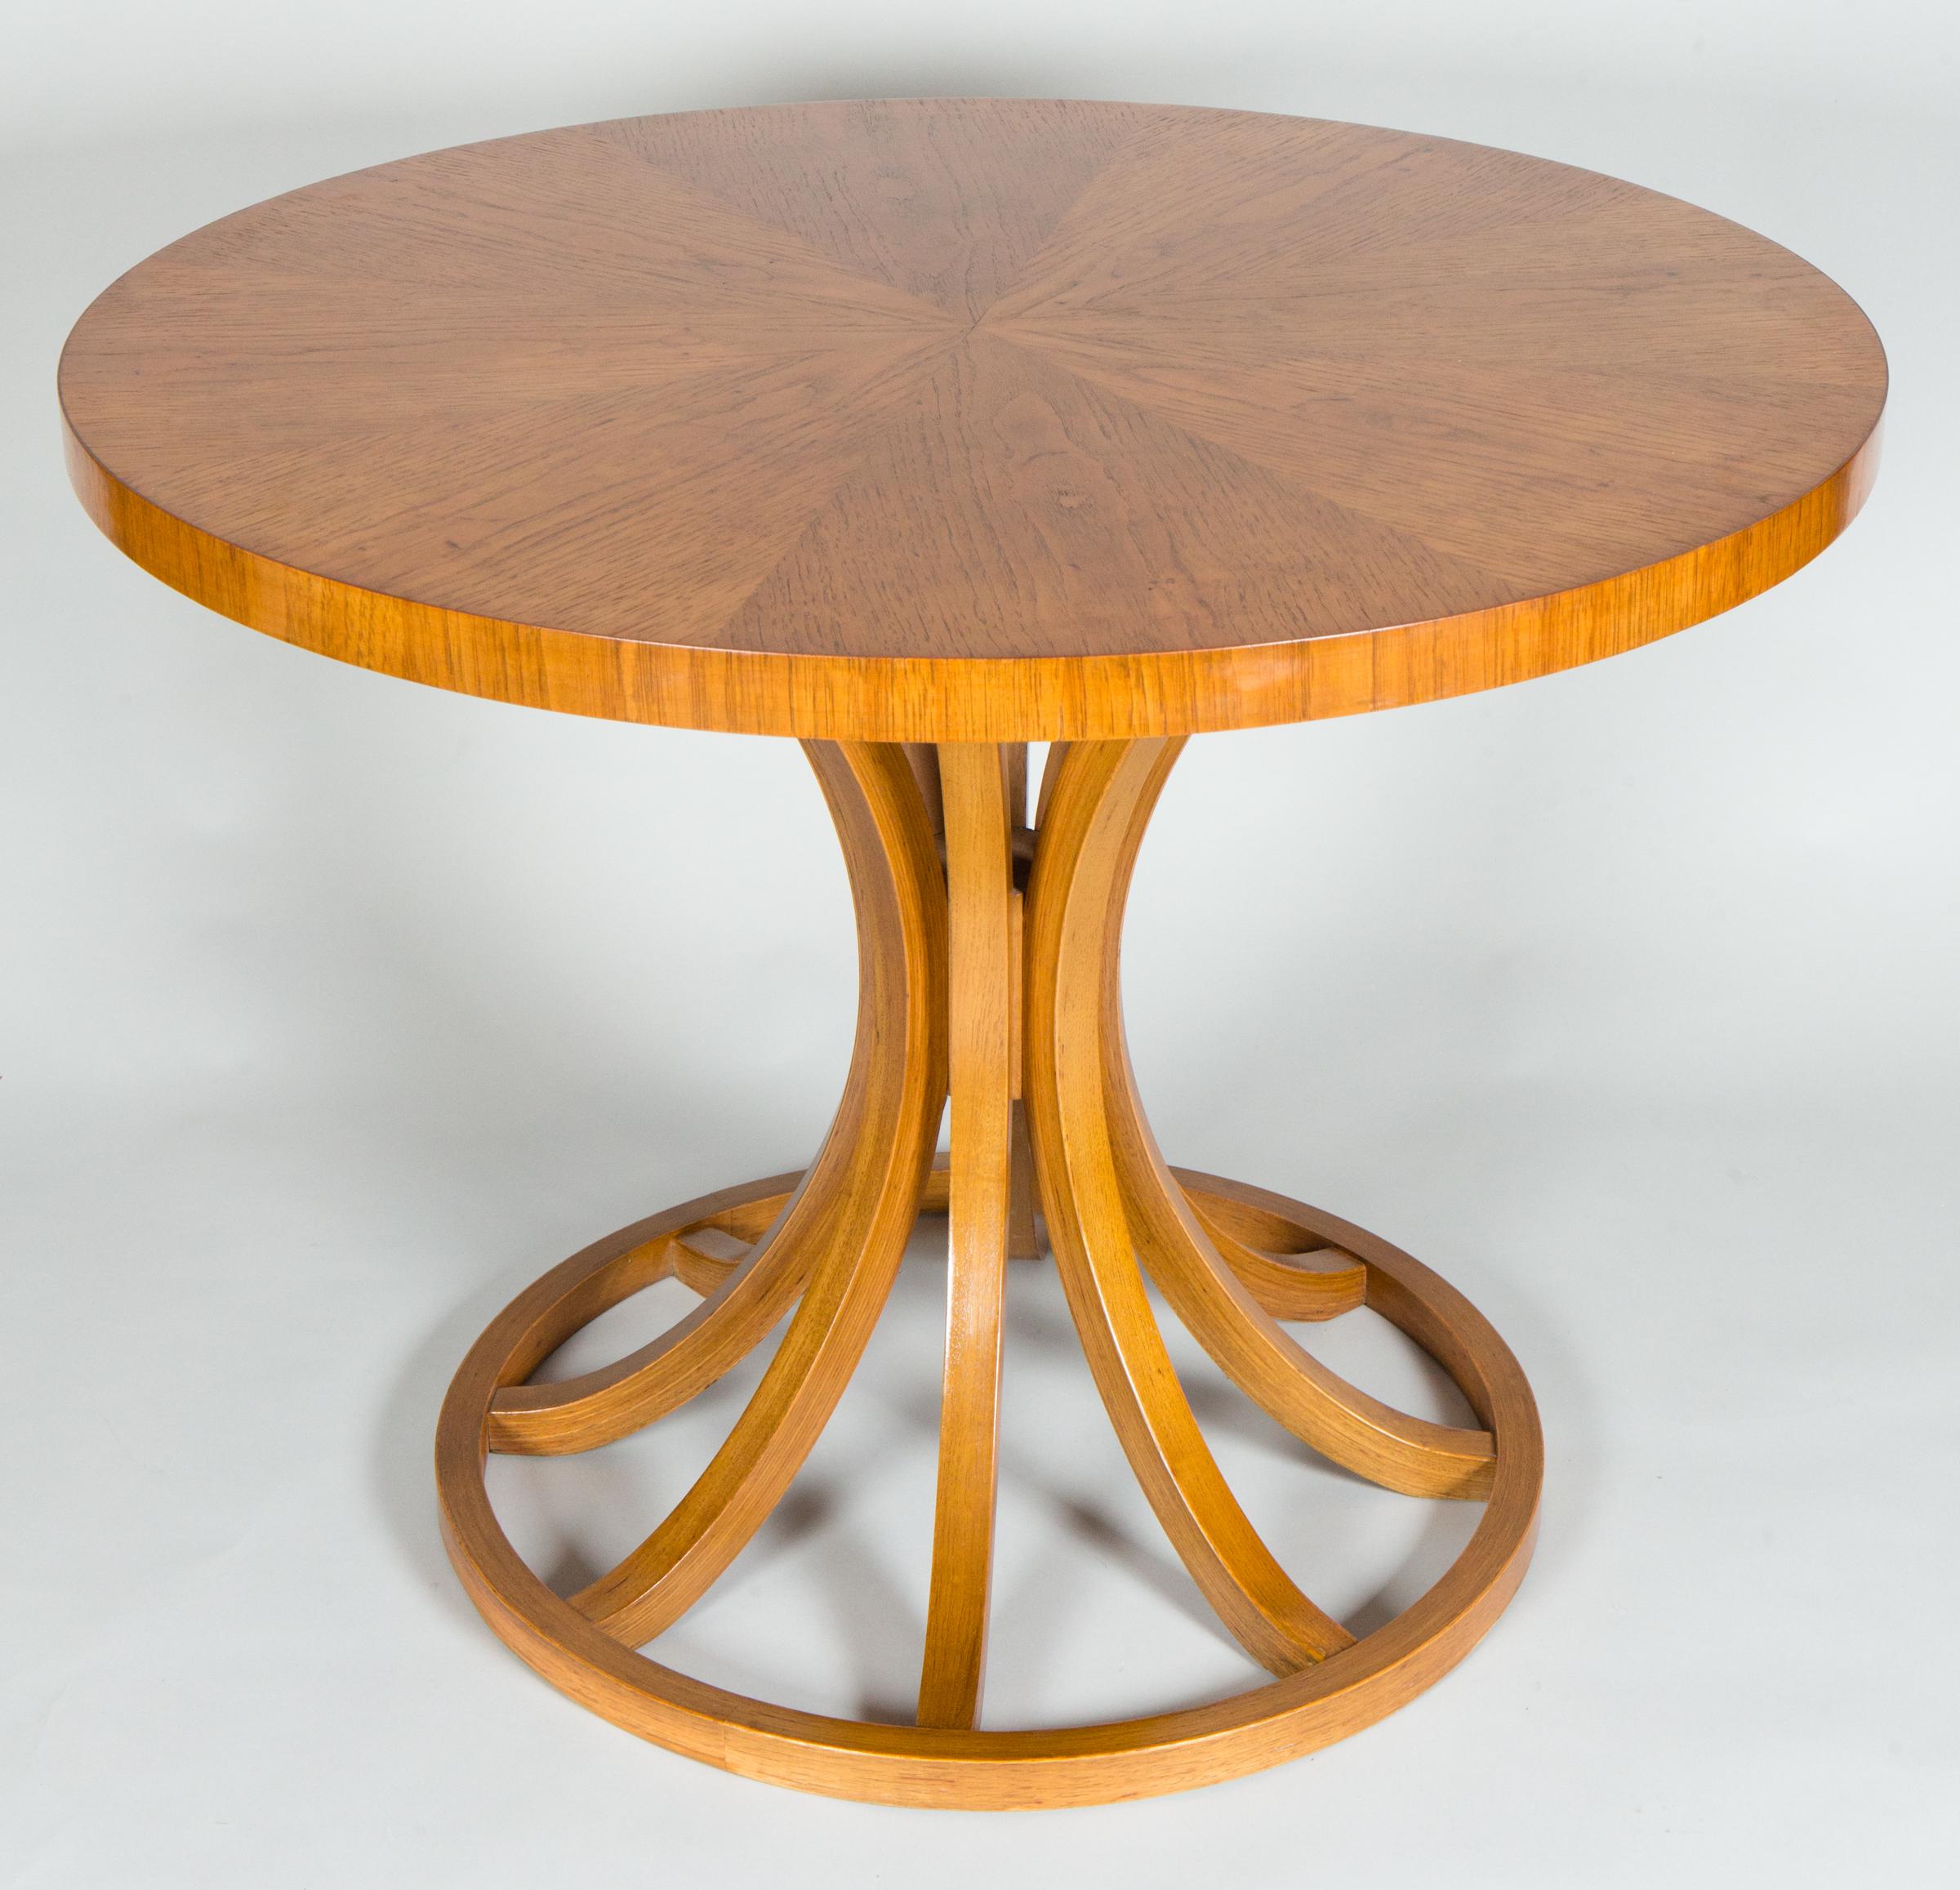 American midcentury oak table with curved legs to give the table a graceful and bold hourglass design.